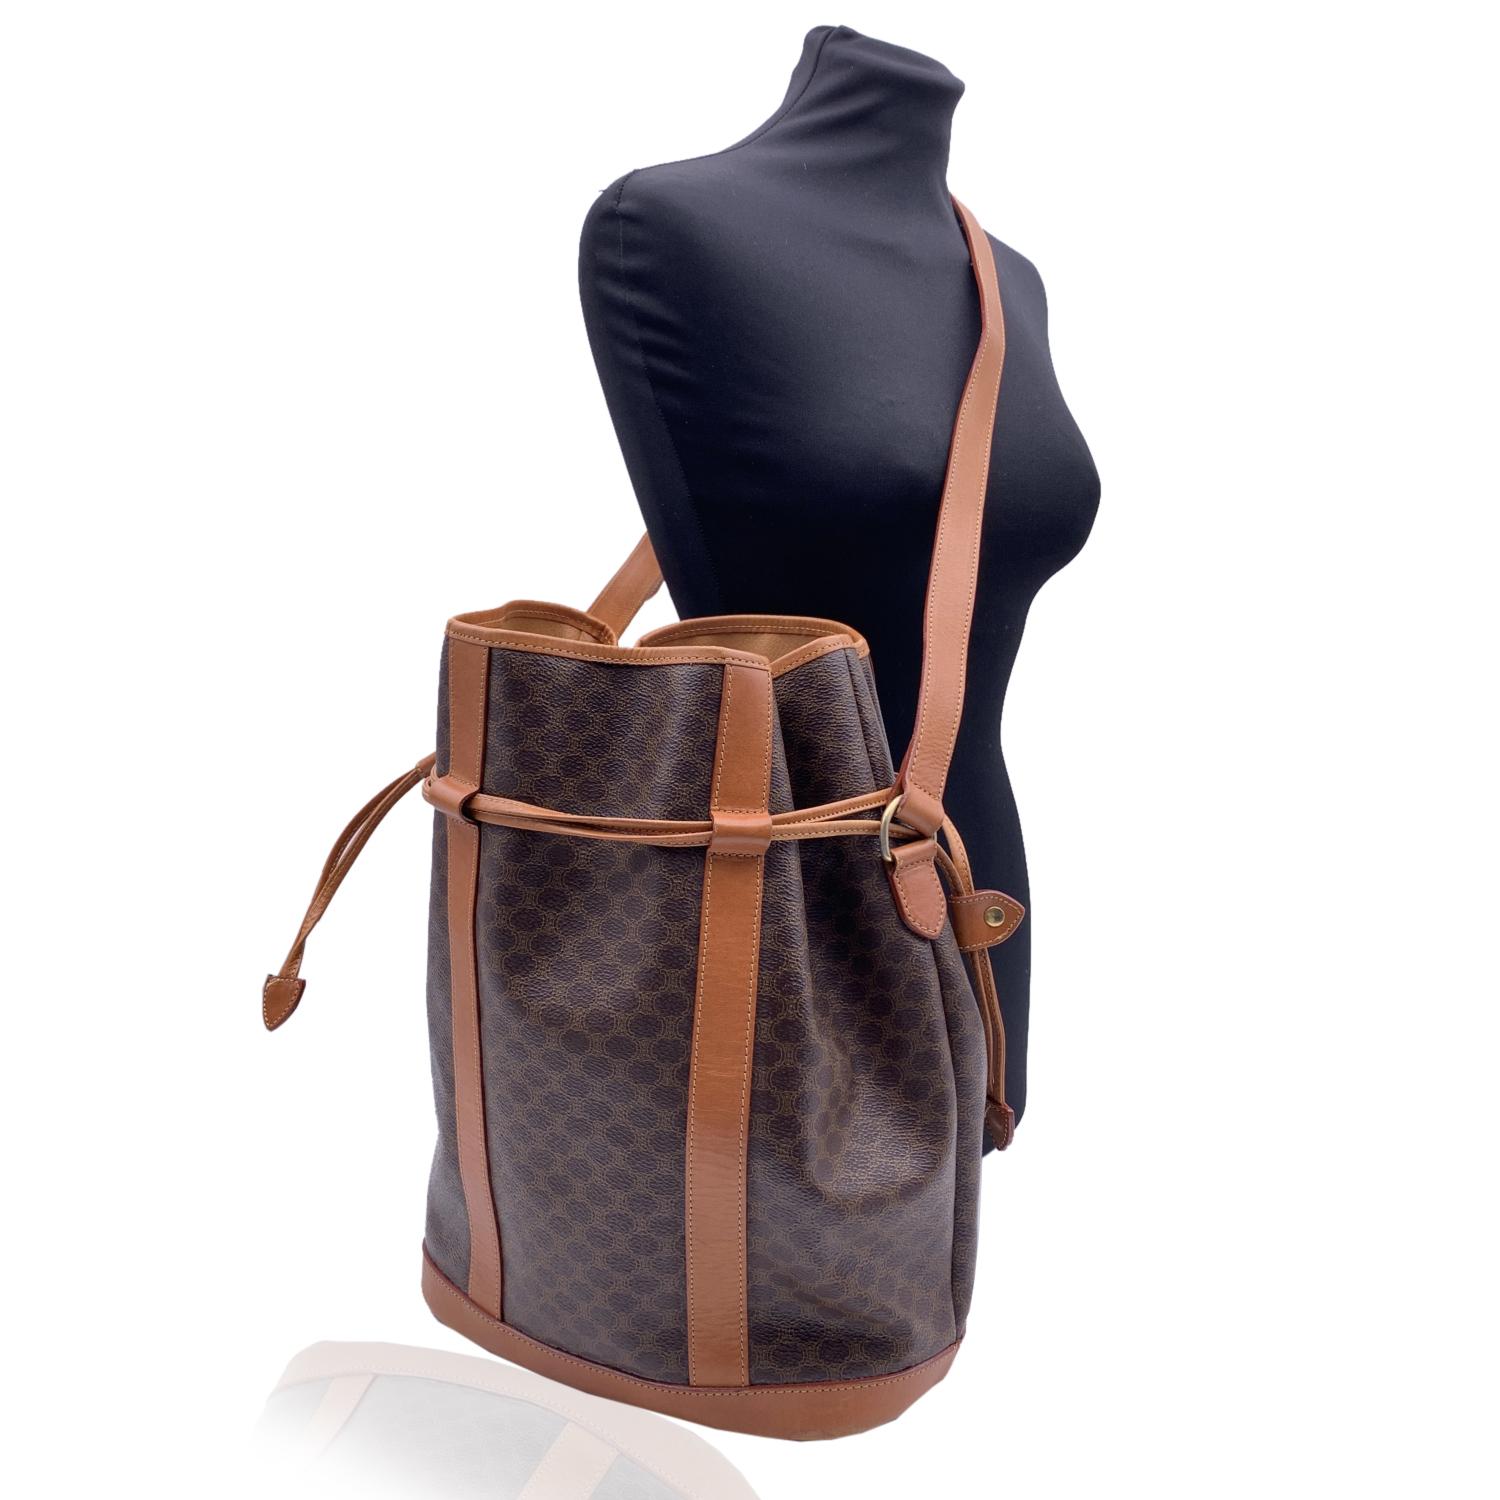 Celine Brown 'Macadam' Canvas Bucket Bag with genuine leather trim and shoulder Straps. Drawstring closure. Tan lining. 1 side zip pocket inside. 'Celine Paris ' and 'Made in Italy' engraved inside


Details

MATERIAL: Canvas

COLOR: Brown

MODEL: